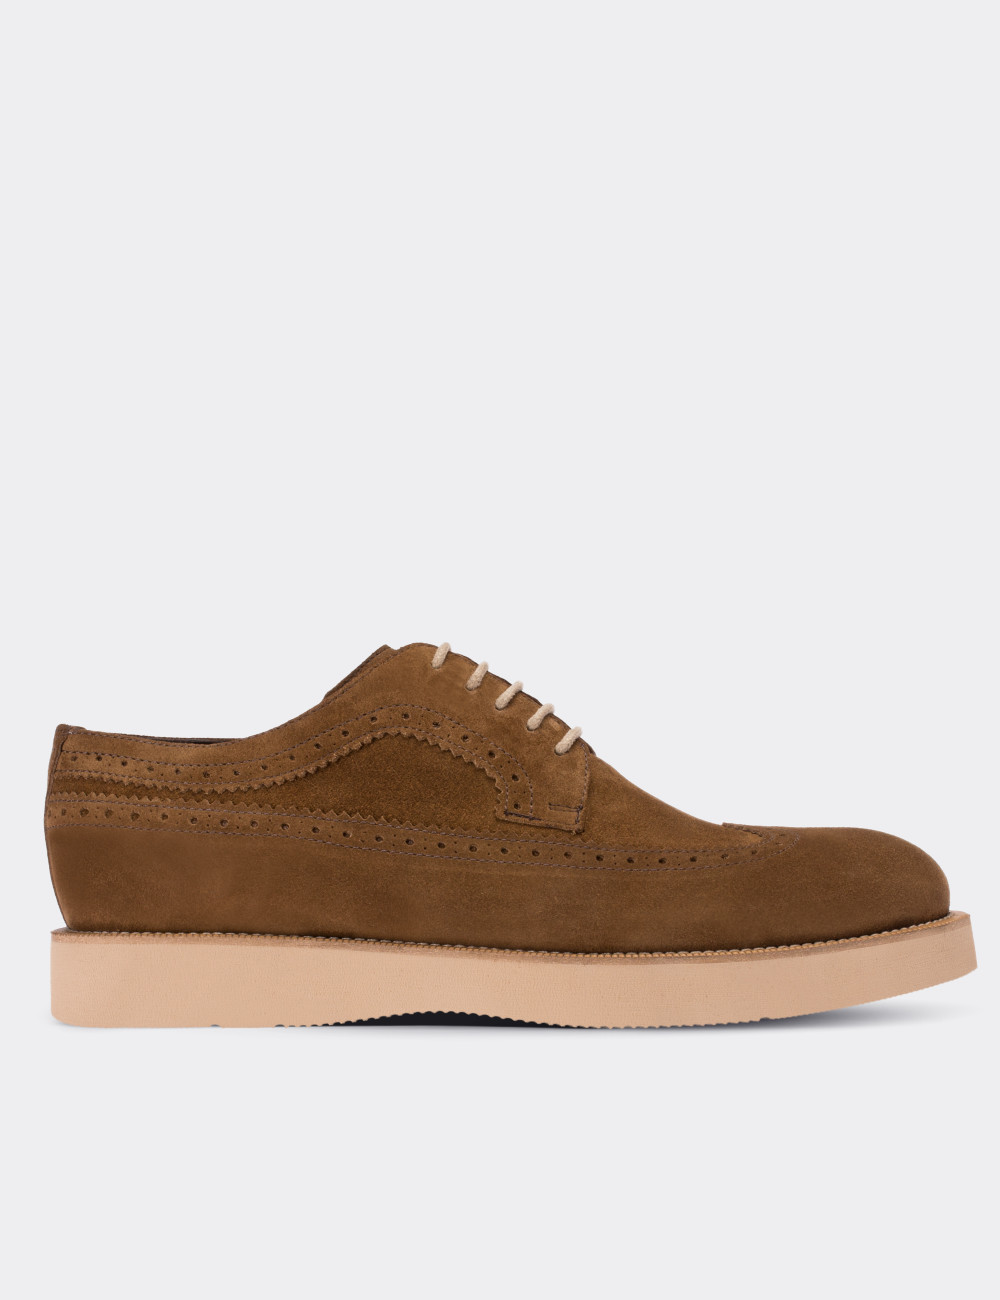 Brown Suede Leather Lace-up Shoes - 01293MKHVE22